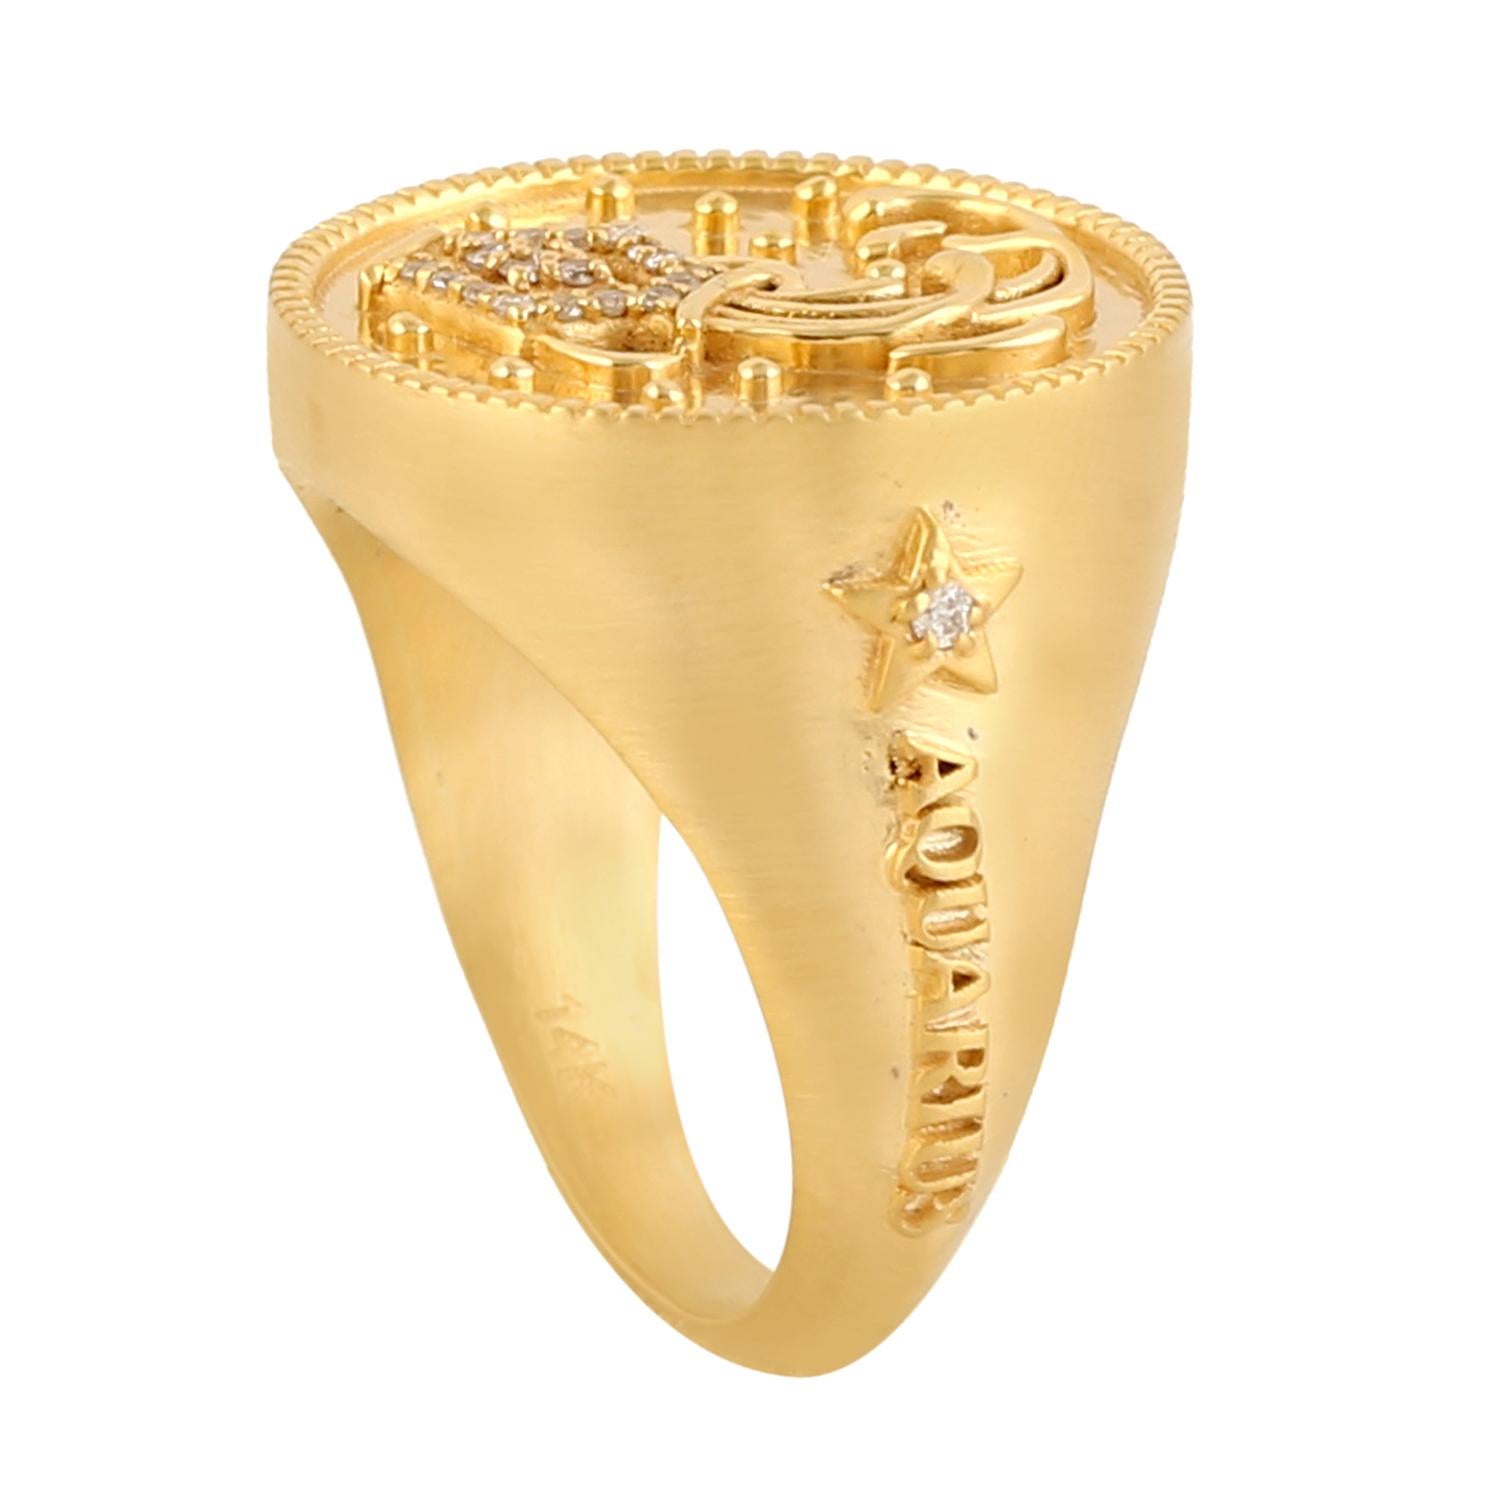 Aquarius Sunsign Zodiac Ring with Pave Diamonds Made in 14k Gold In New Condition For Sale In New York, NY